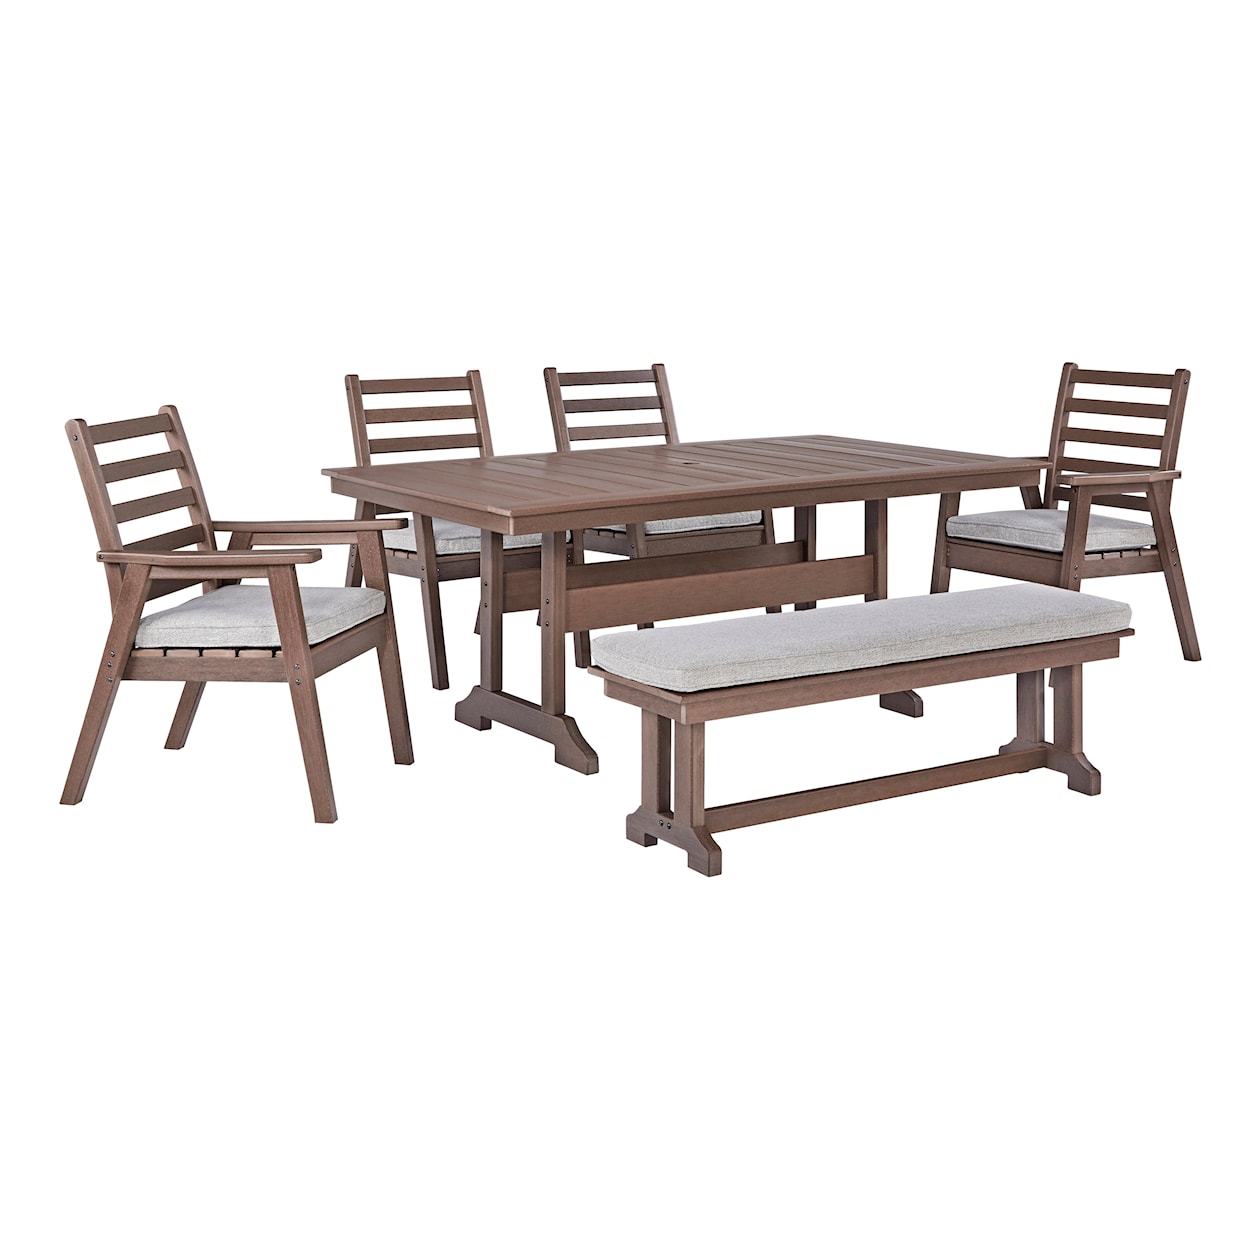 Signature Design by Ashley Emmeline Outdoor Dining Table